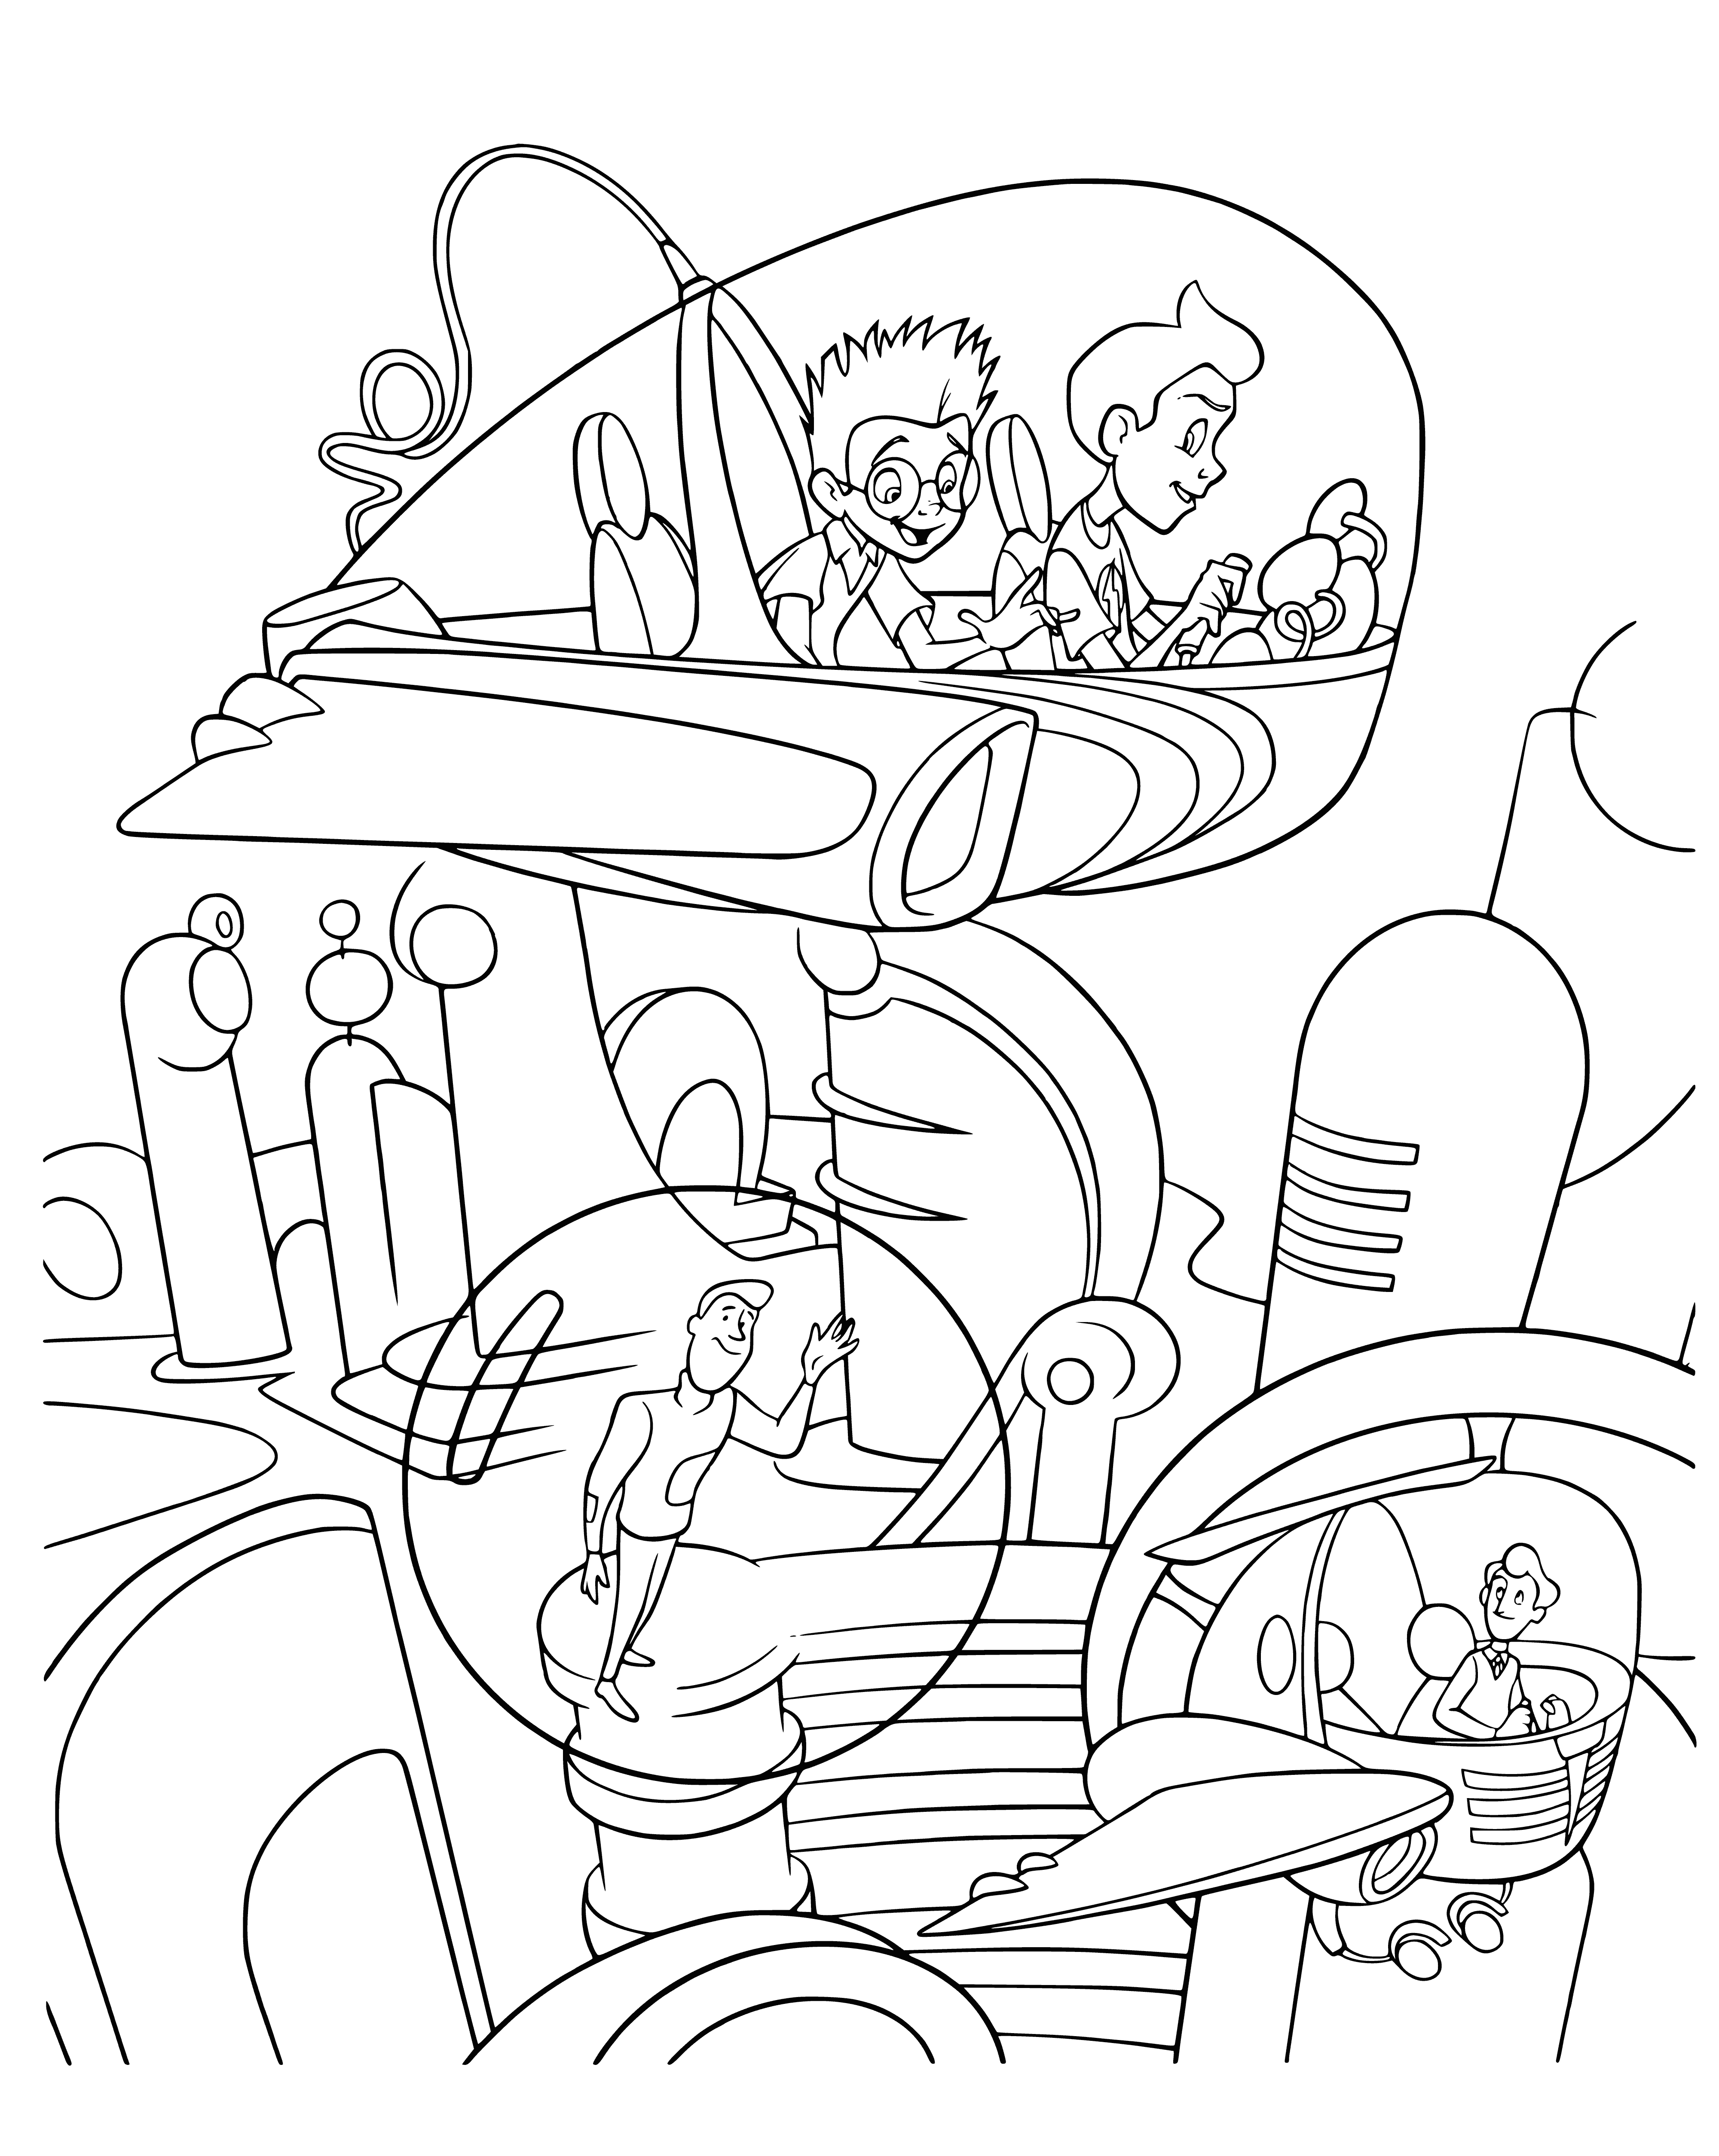 coloring page: Color the time machine from Meet the Robinsons!: Large, round, silver machine with glass dome & red doors. Silver cylindrical tanks, stairway, control panel & metal fence. #coloringpage #MeettheRobinsons